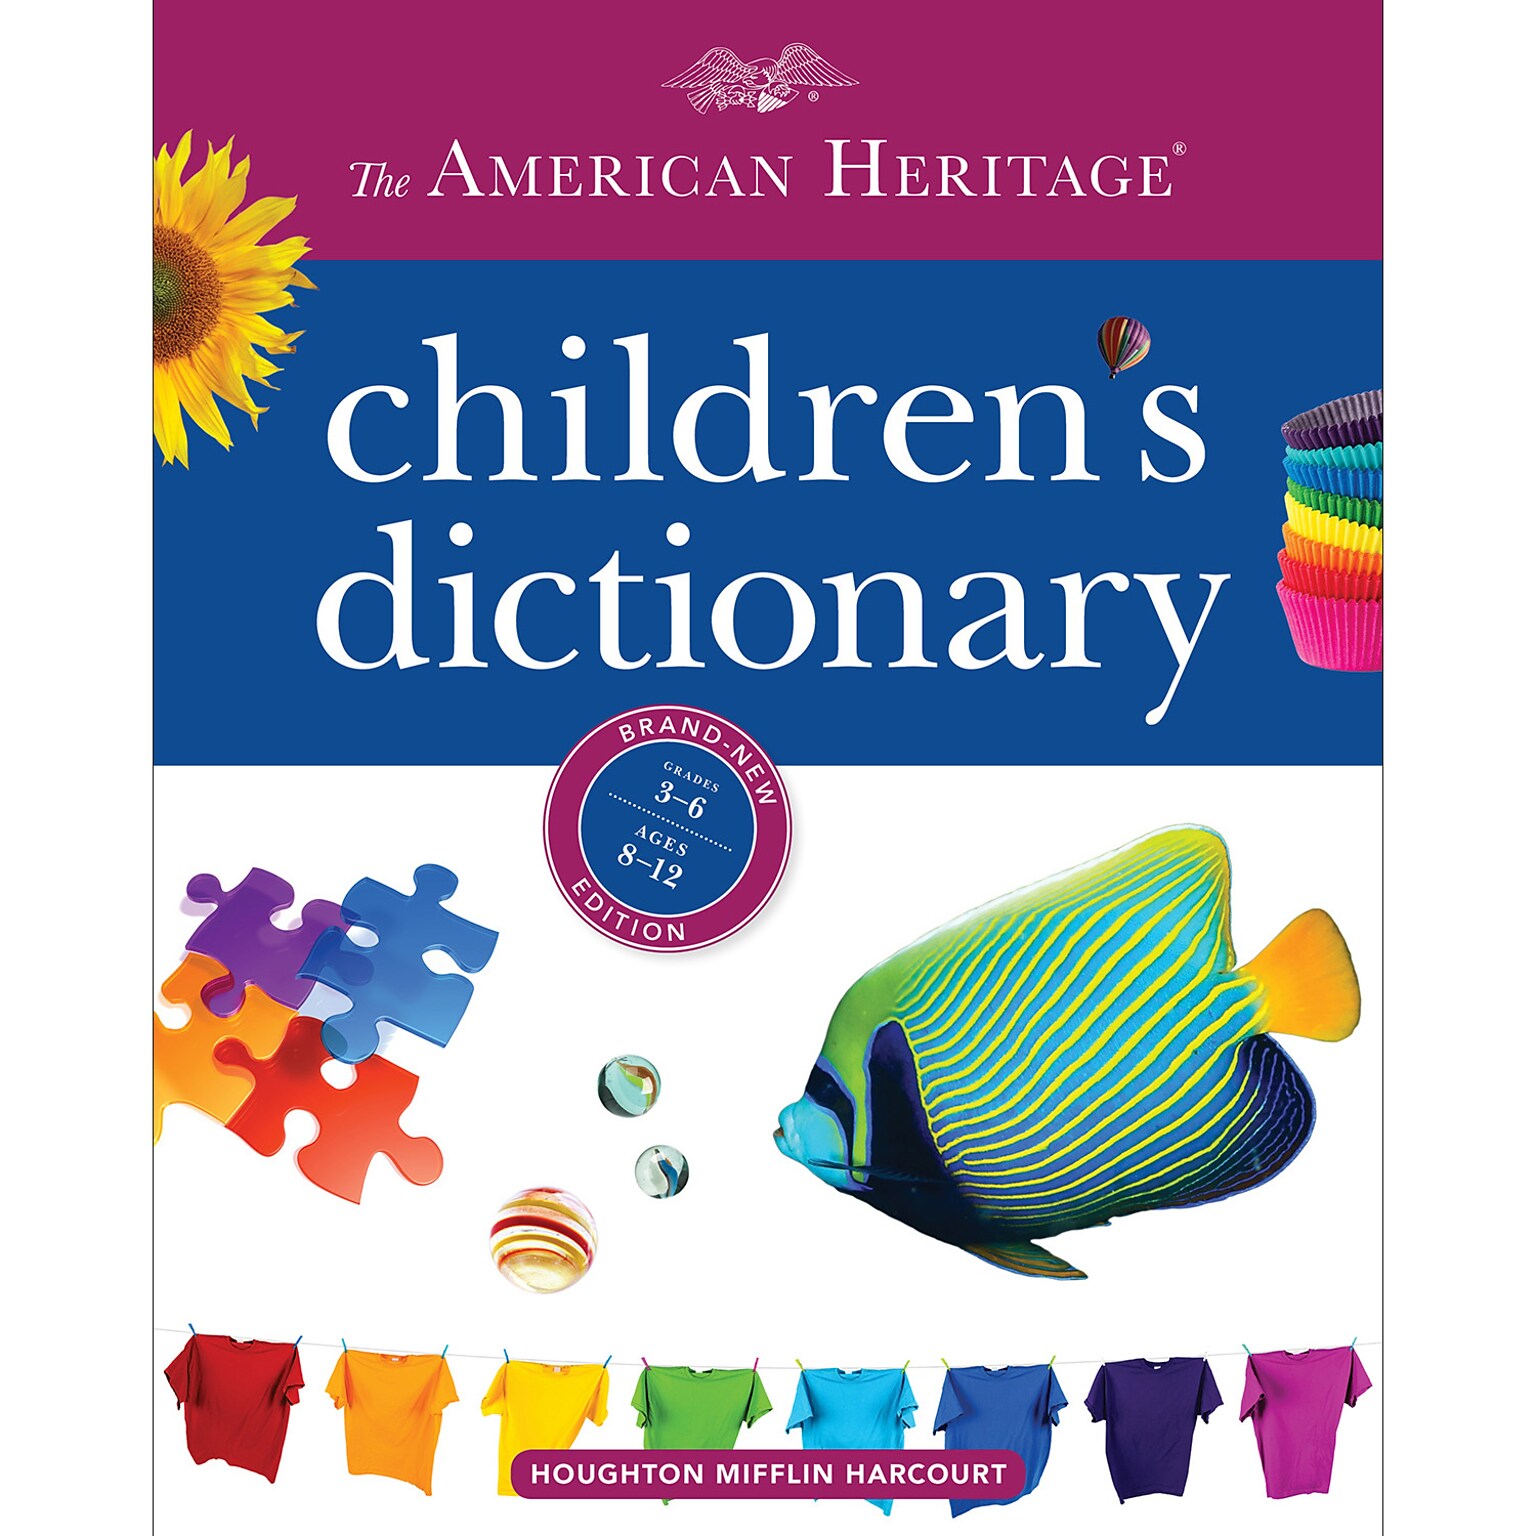 American Heritage Childrens Dictionary by Editors of the American Heritage Dictionaries, Hardcover (9781328787354)